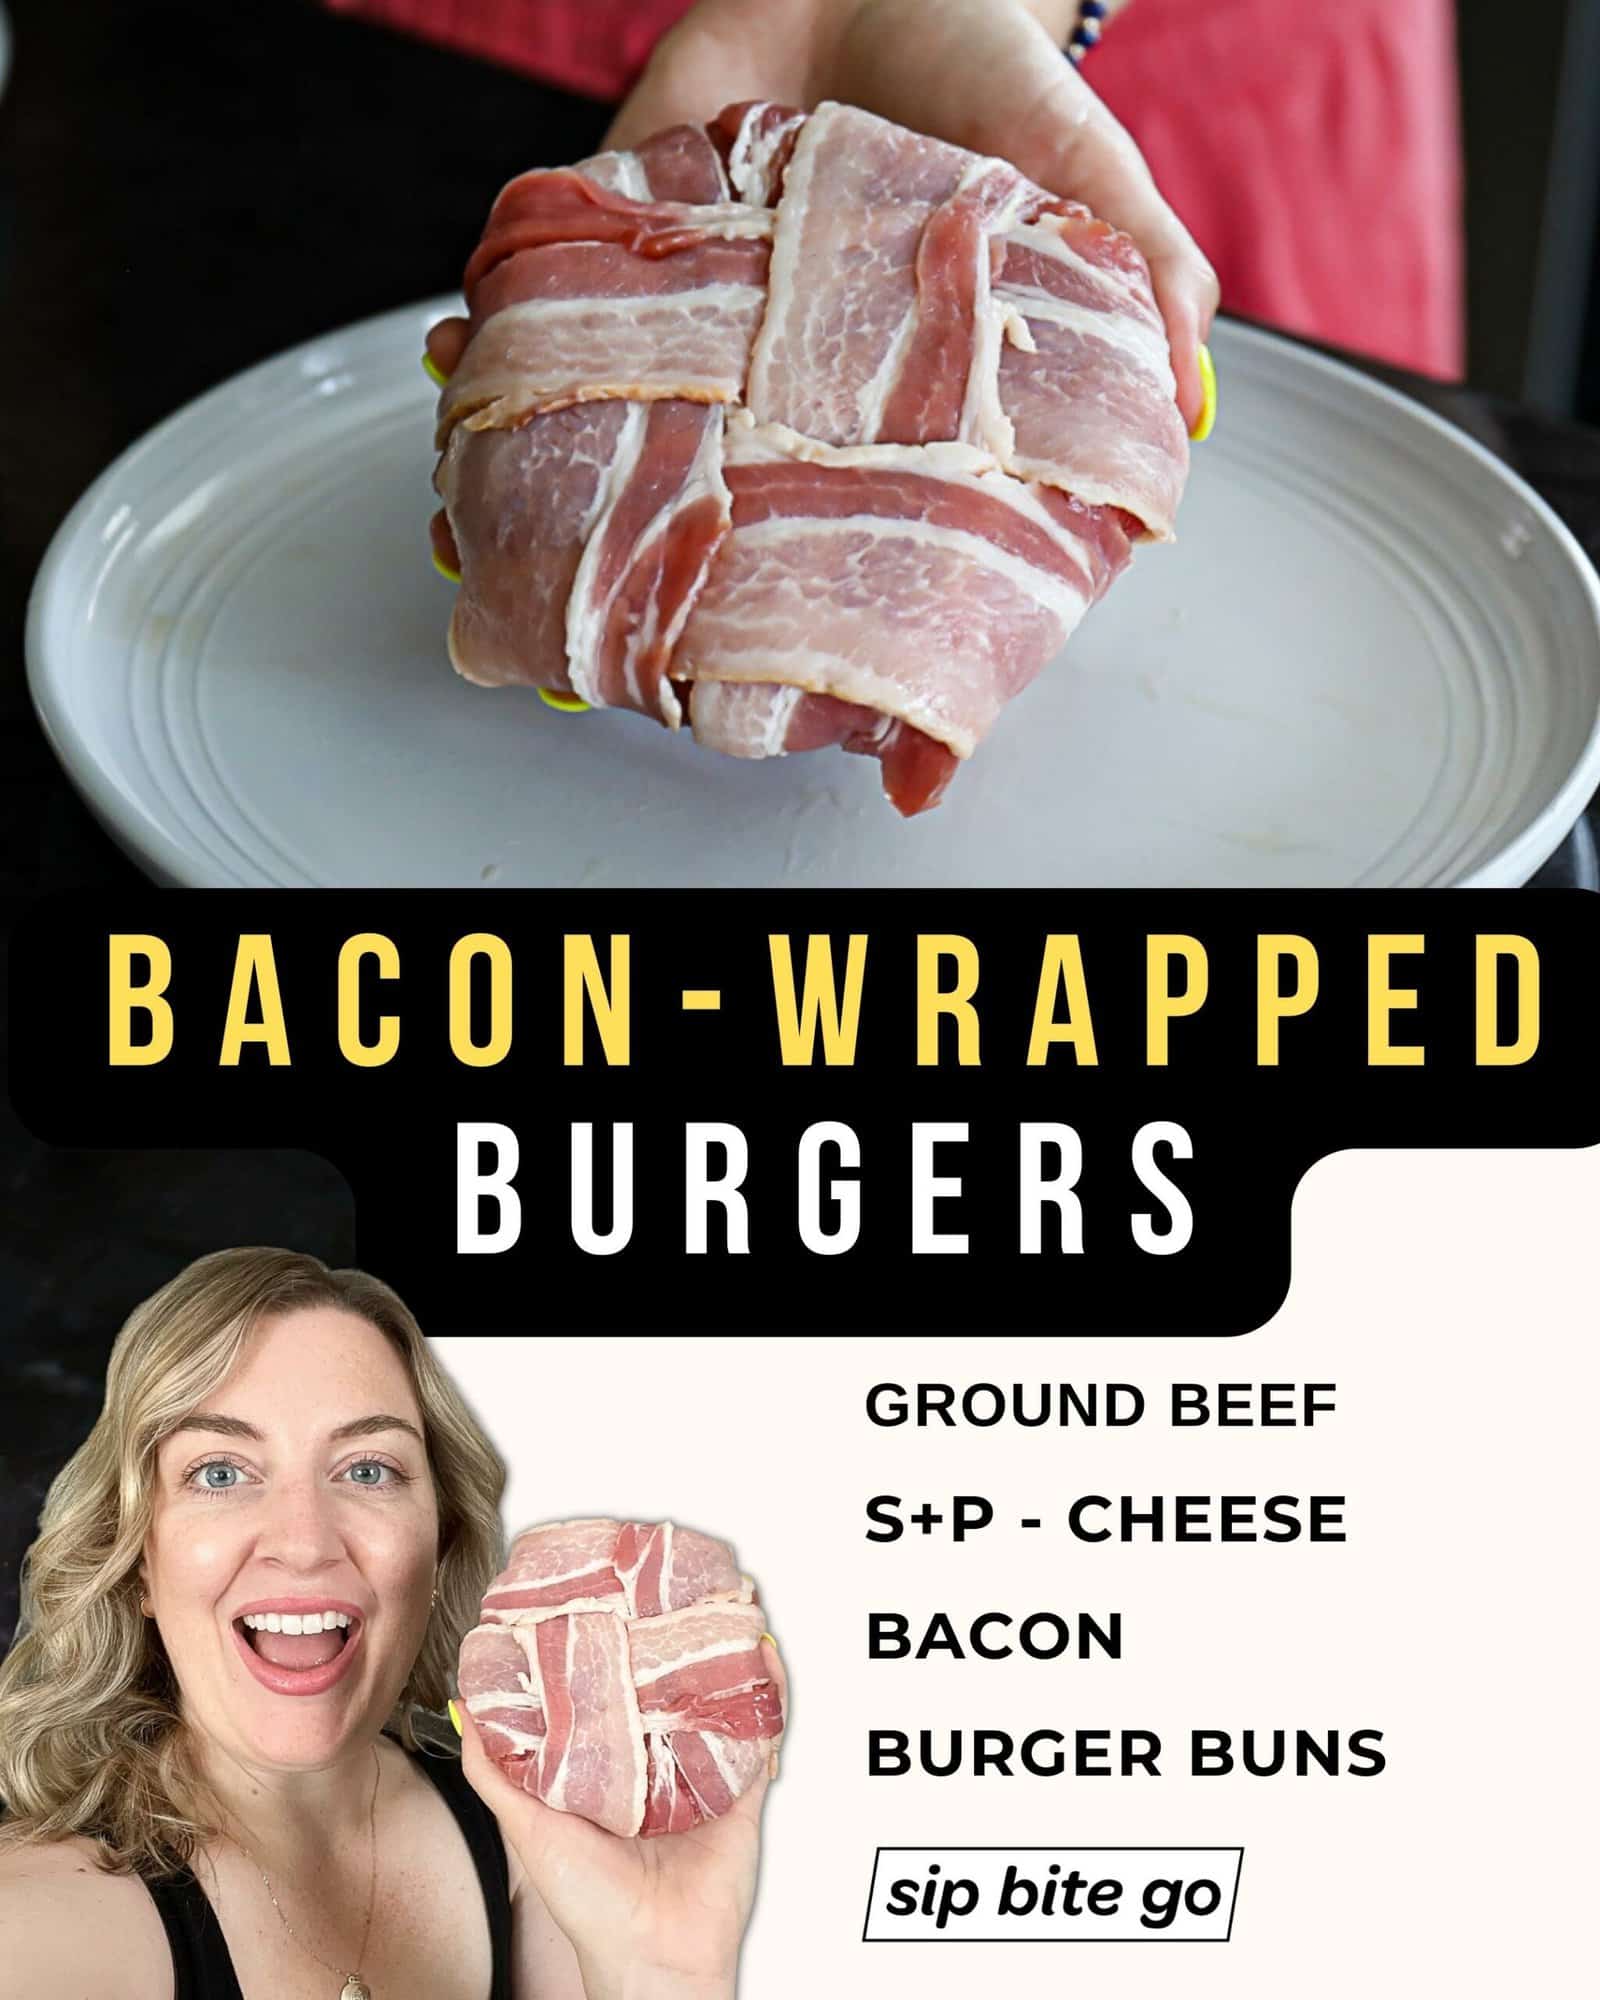 Infographic with ingredients for hamburgers wrapped in bacon